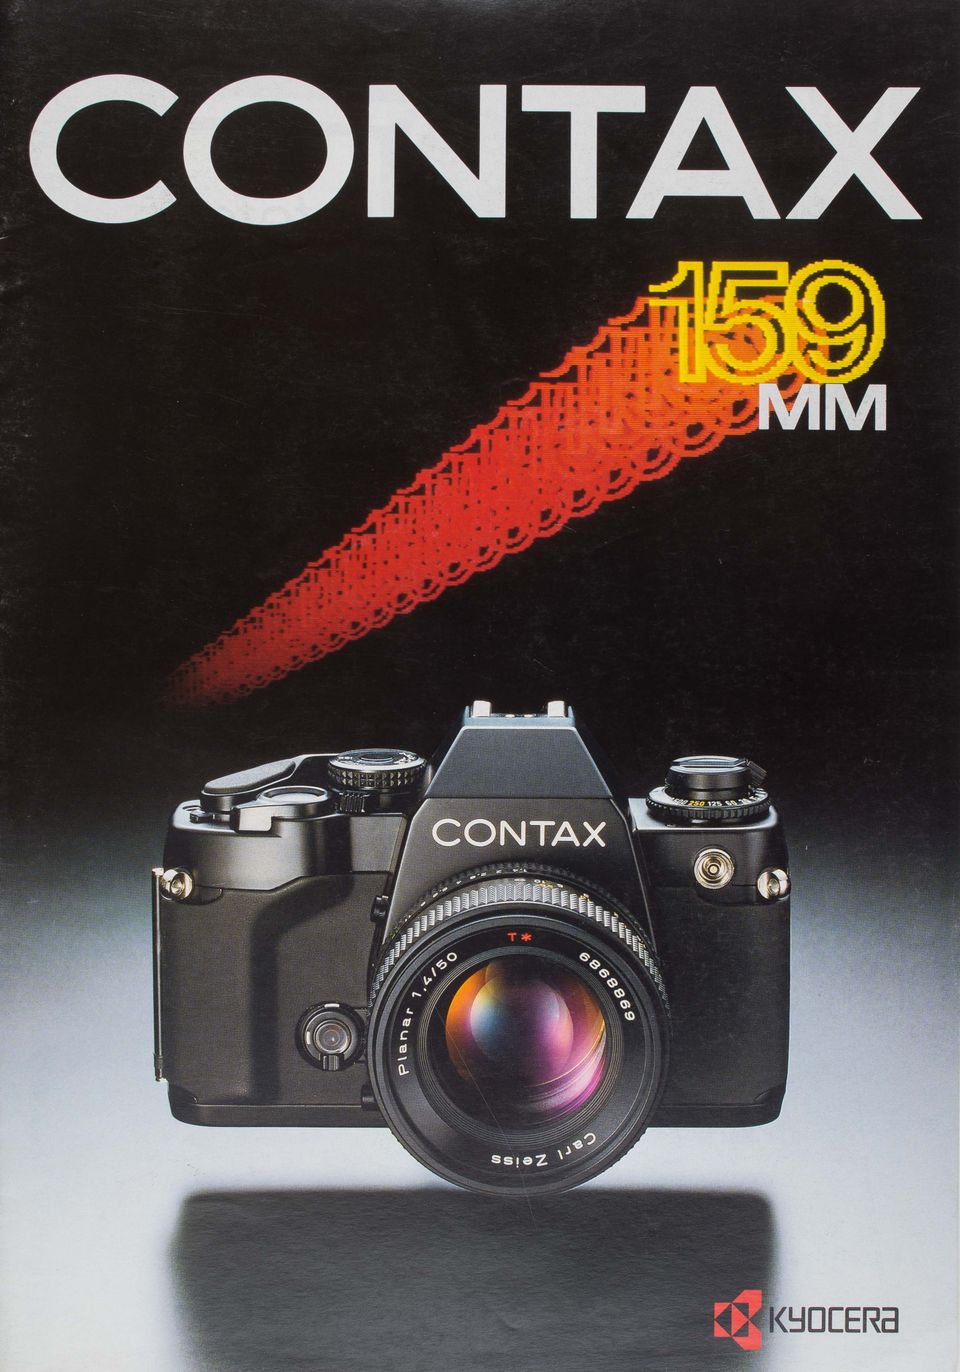 Contax 159mm